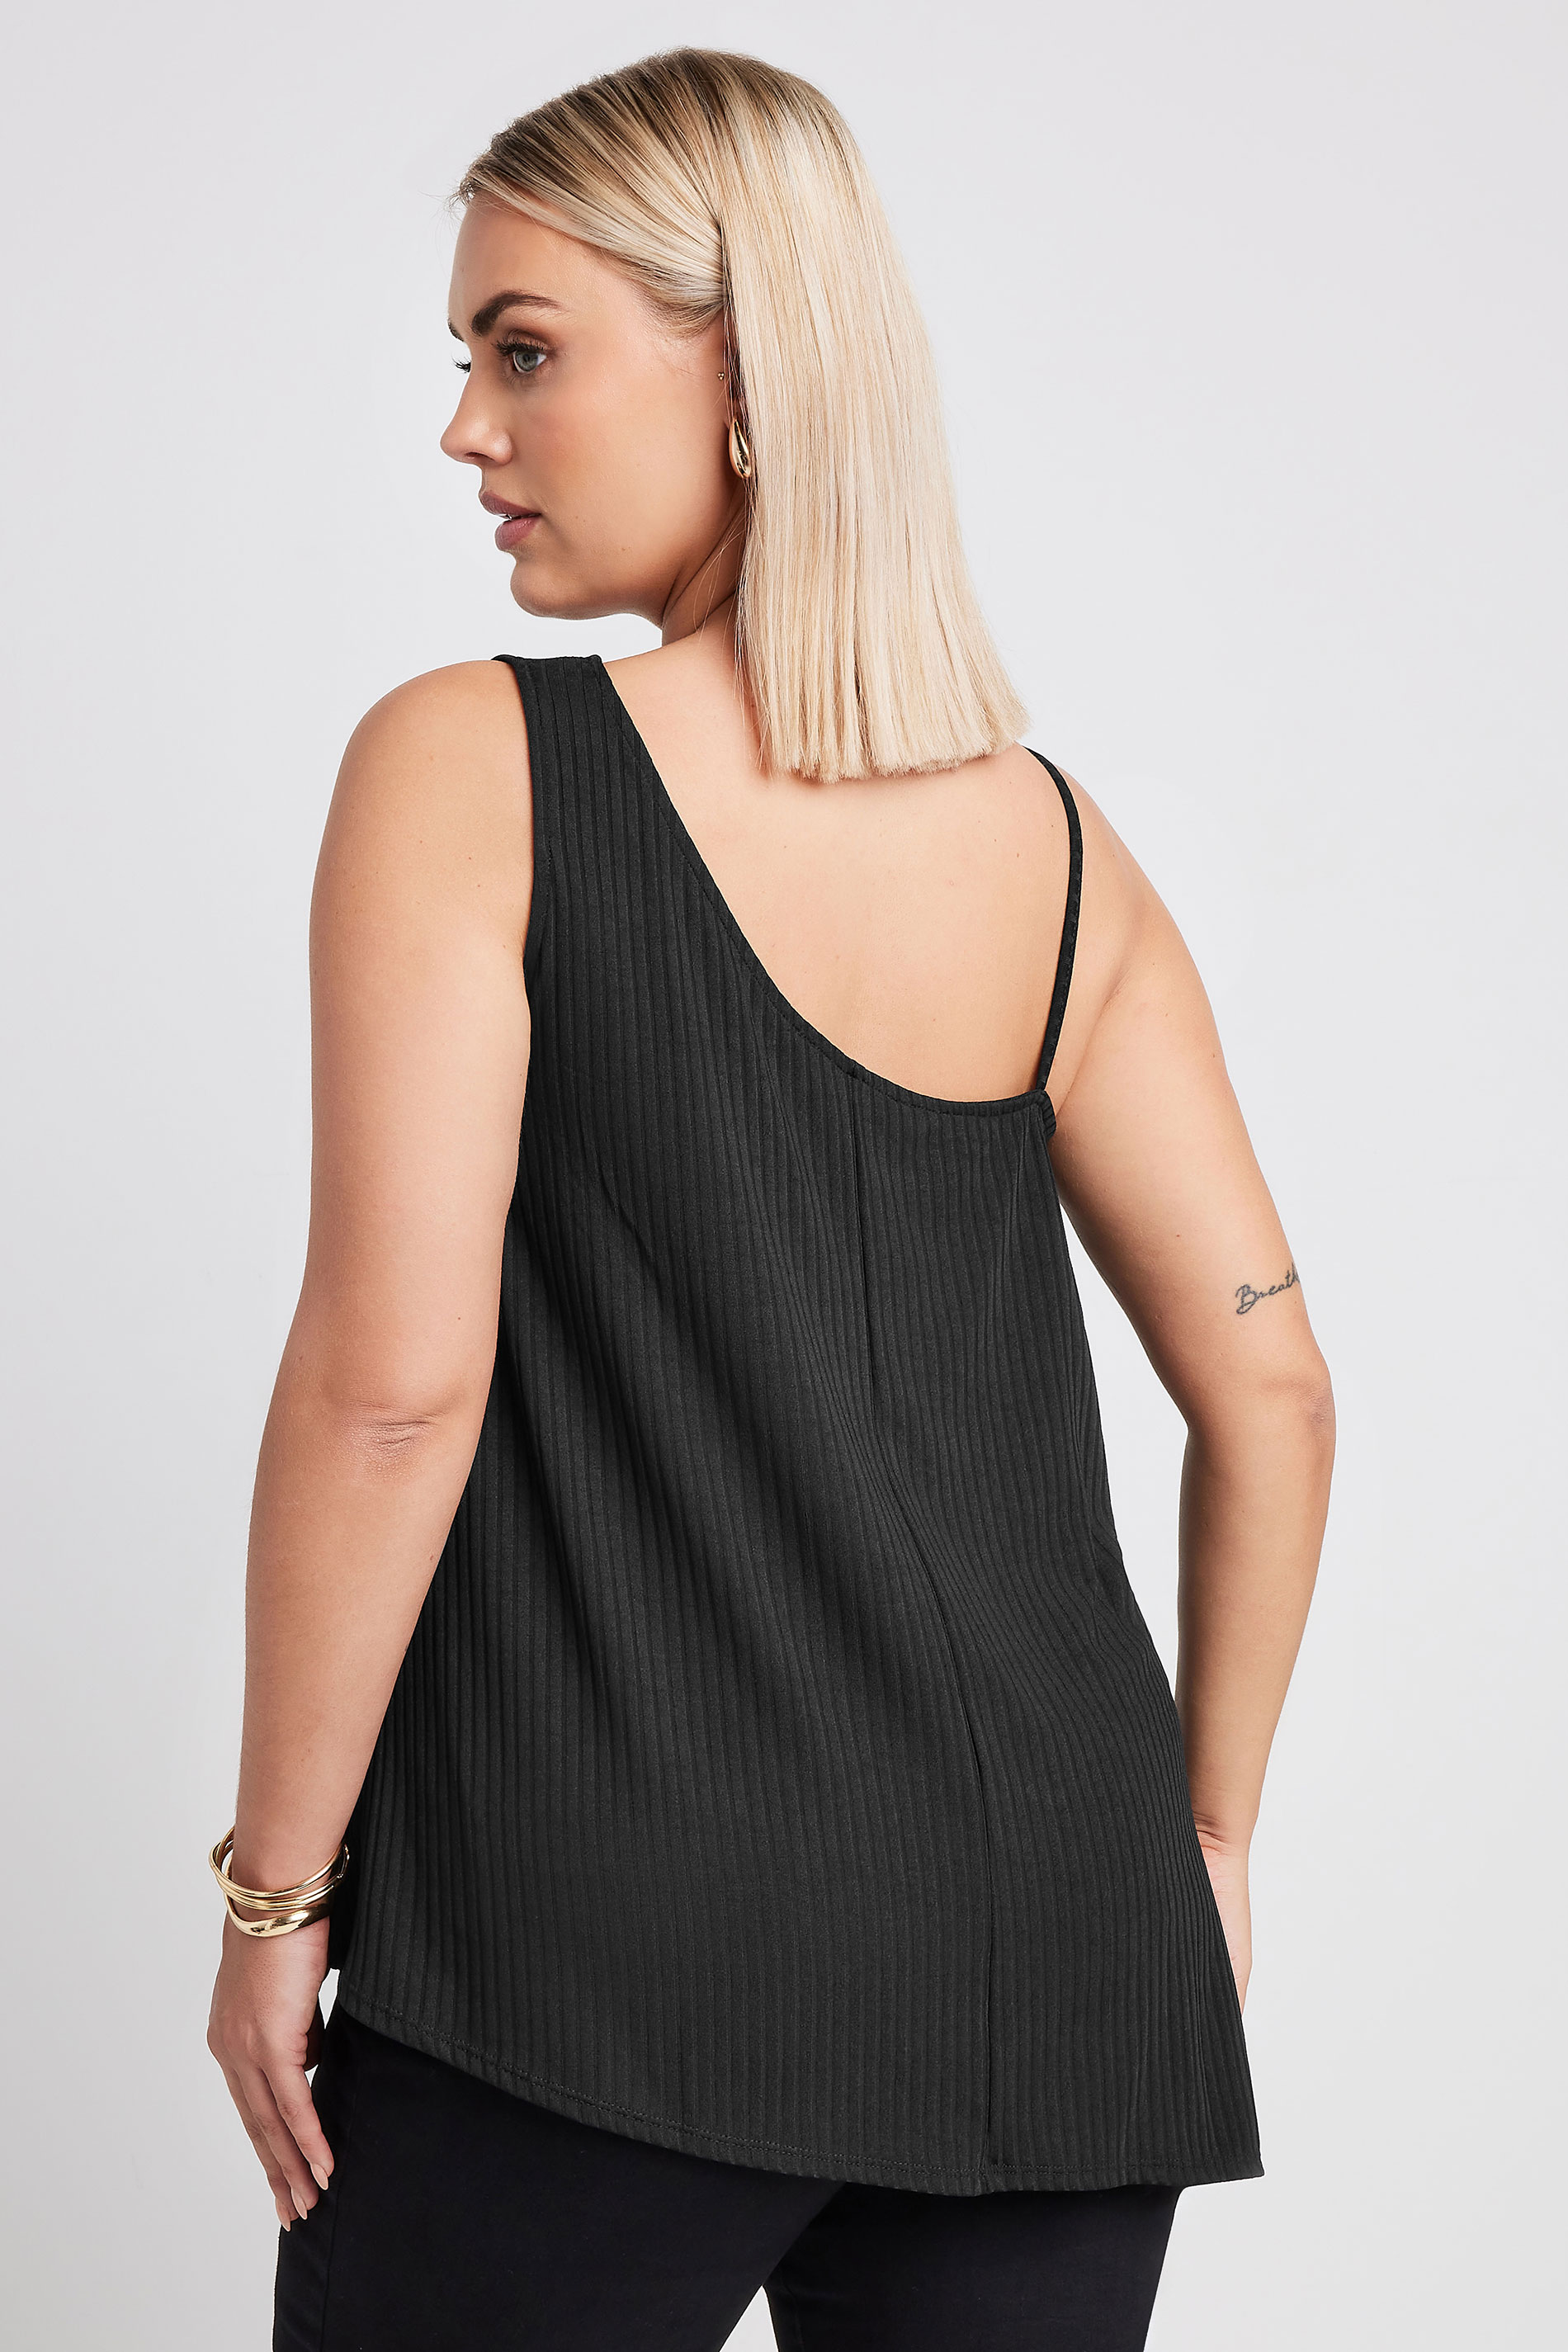 LIMITED COLLECTION Plus Size Black Metal Trim Ribbed Vest Top | Yours Clothing 3